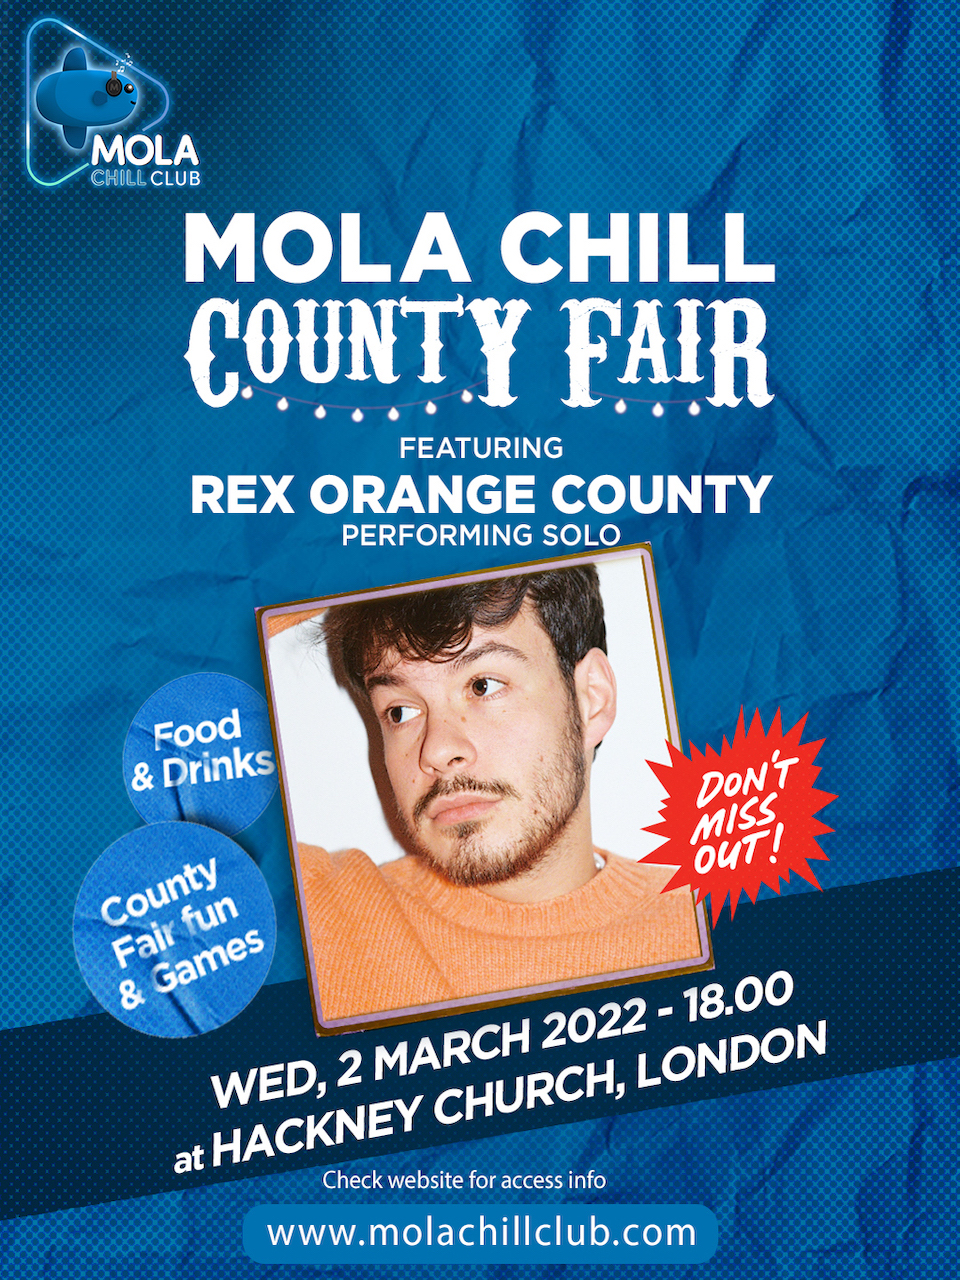 MOLA Announce Launch Event ‘Mola Chill County Fair’ - Headline Performance From ‘Rex Orange County’ To Promote New Private Members ‘Mola Chill Club’ For Music Fans